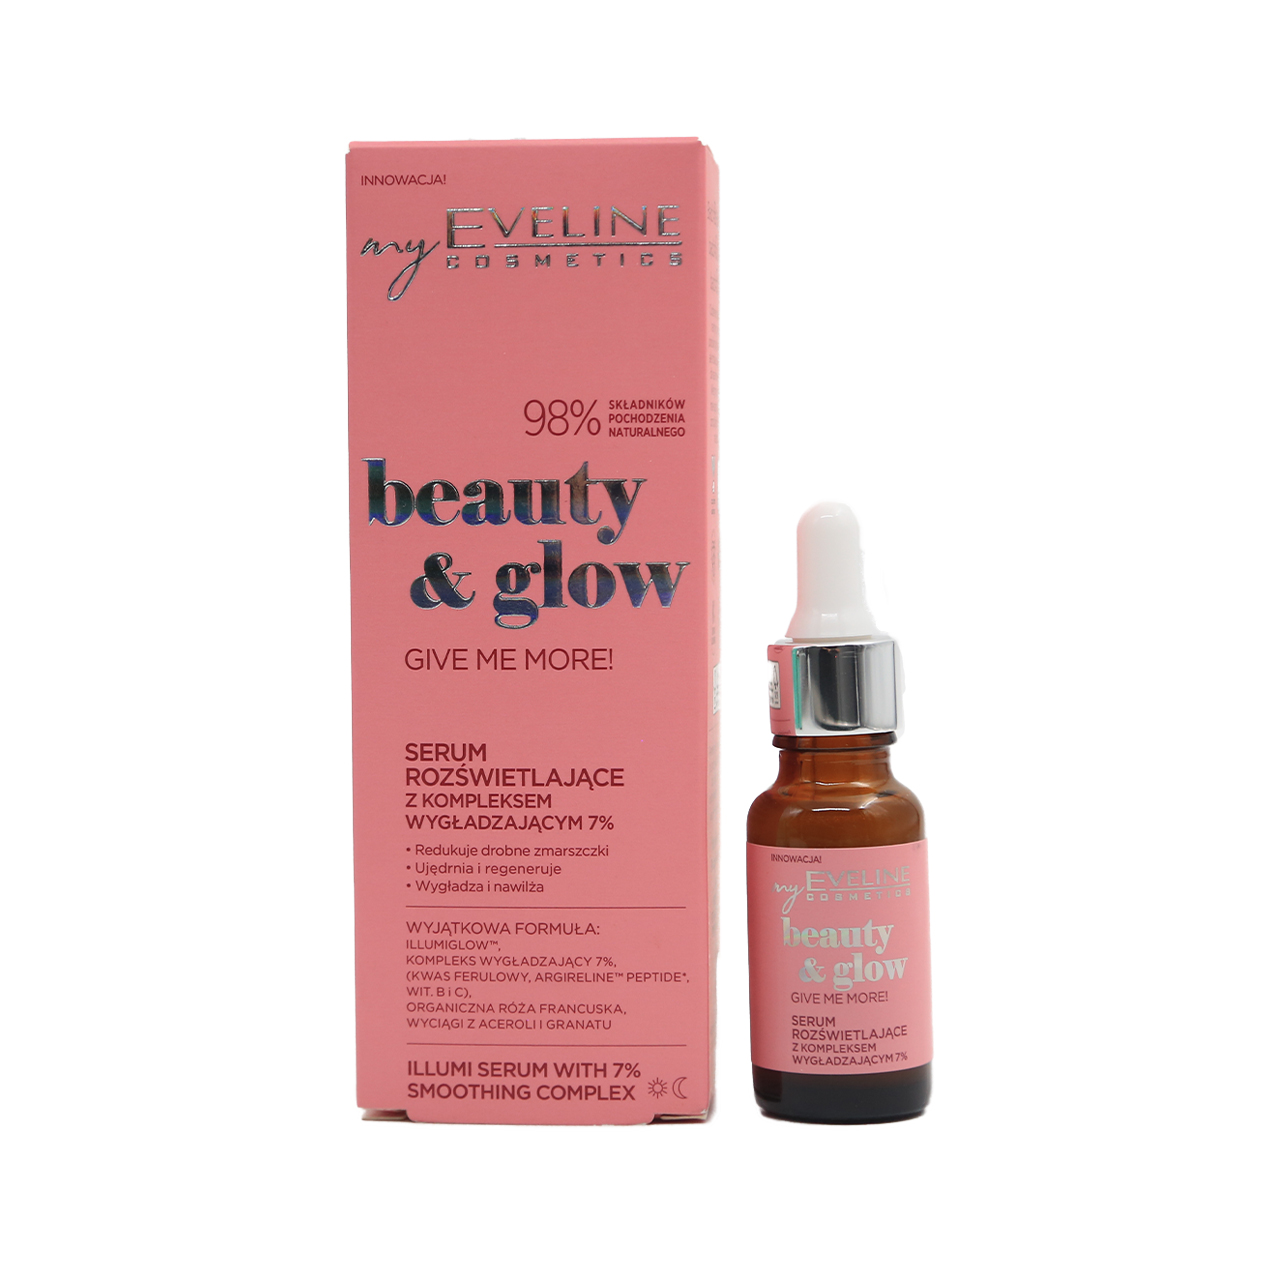 155-5903416028116-Eveline Cosmetics Beauty & Glow Give Me More! Illumi with 7% Smoothing Comples Serum 18ml